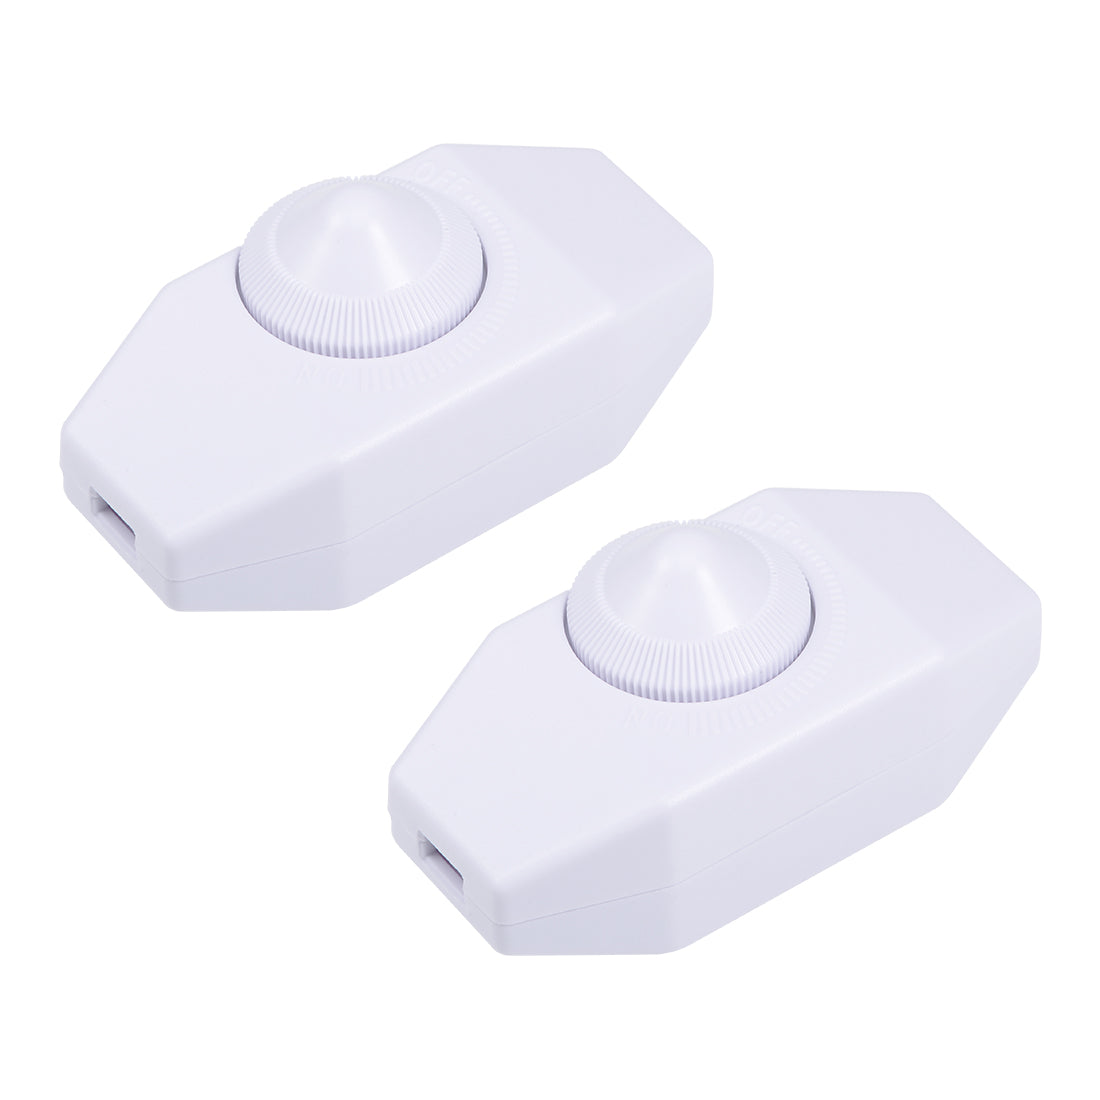 uxcell Uxcell Rotary Cord Switch AC 250V 2A Slide Control Lamp Dimmer 100-Watt White 2pcs